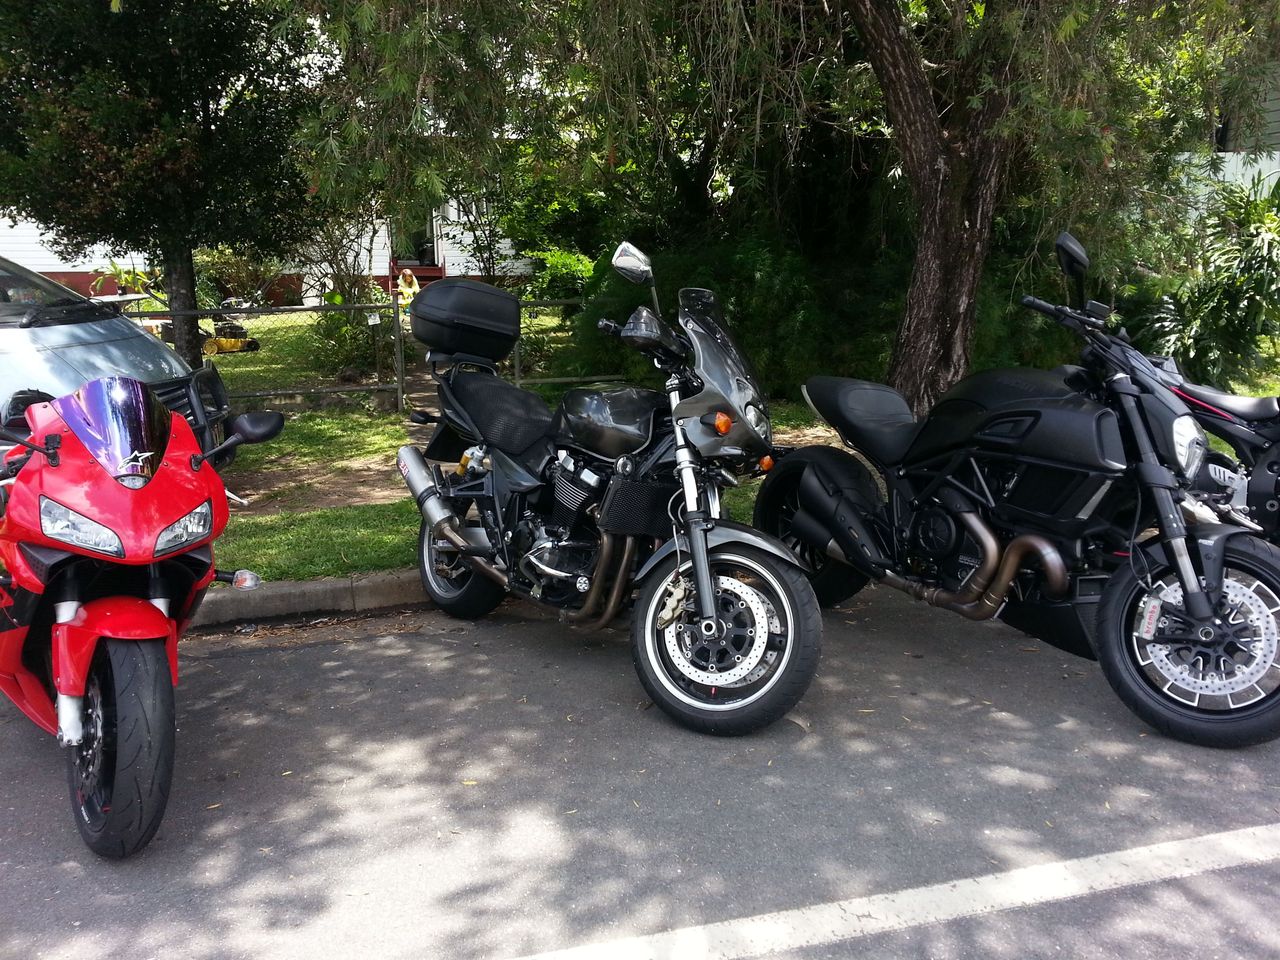 GSX is in the middle group ride with friends